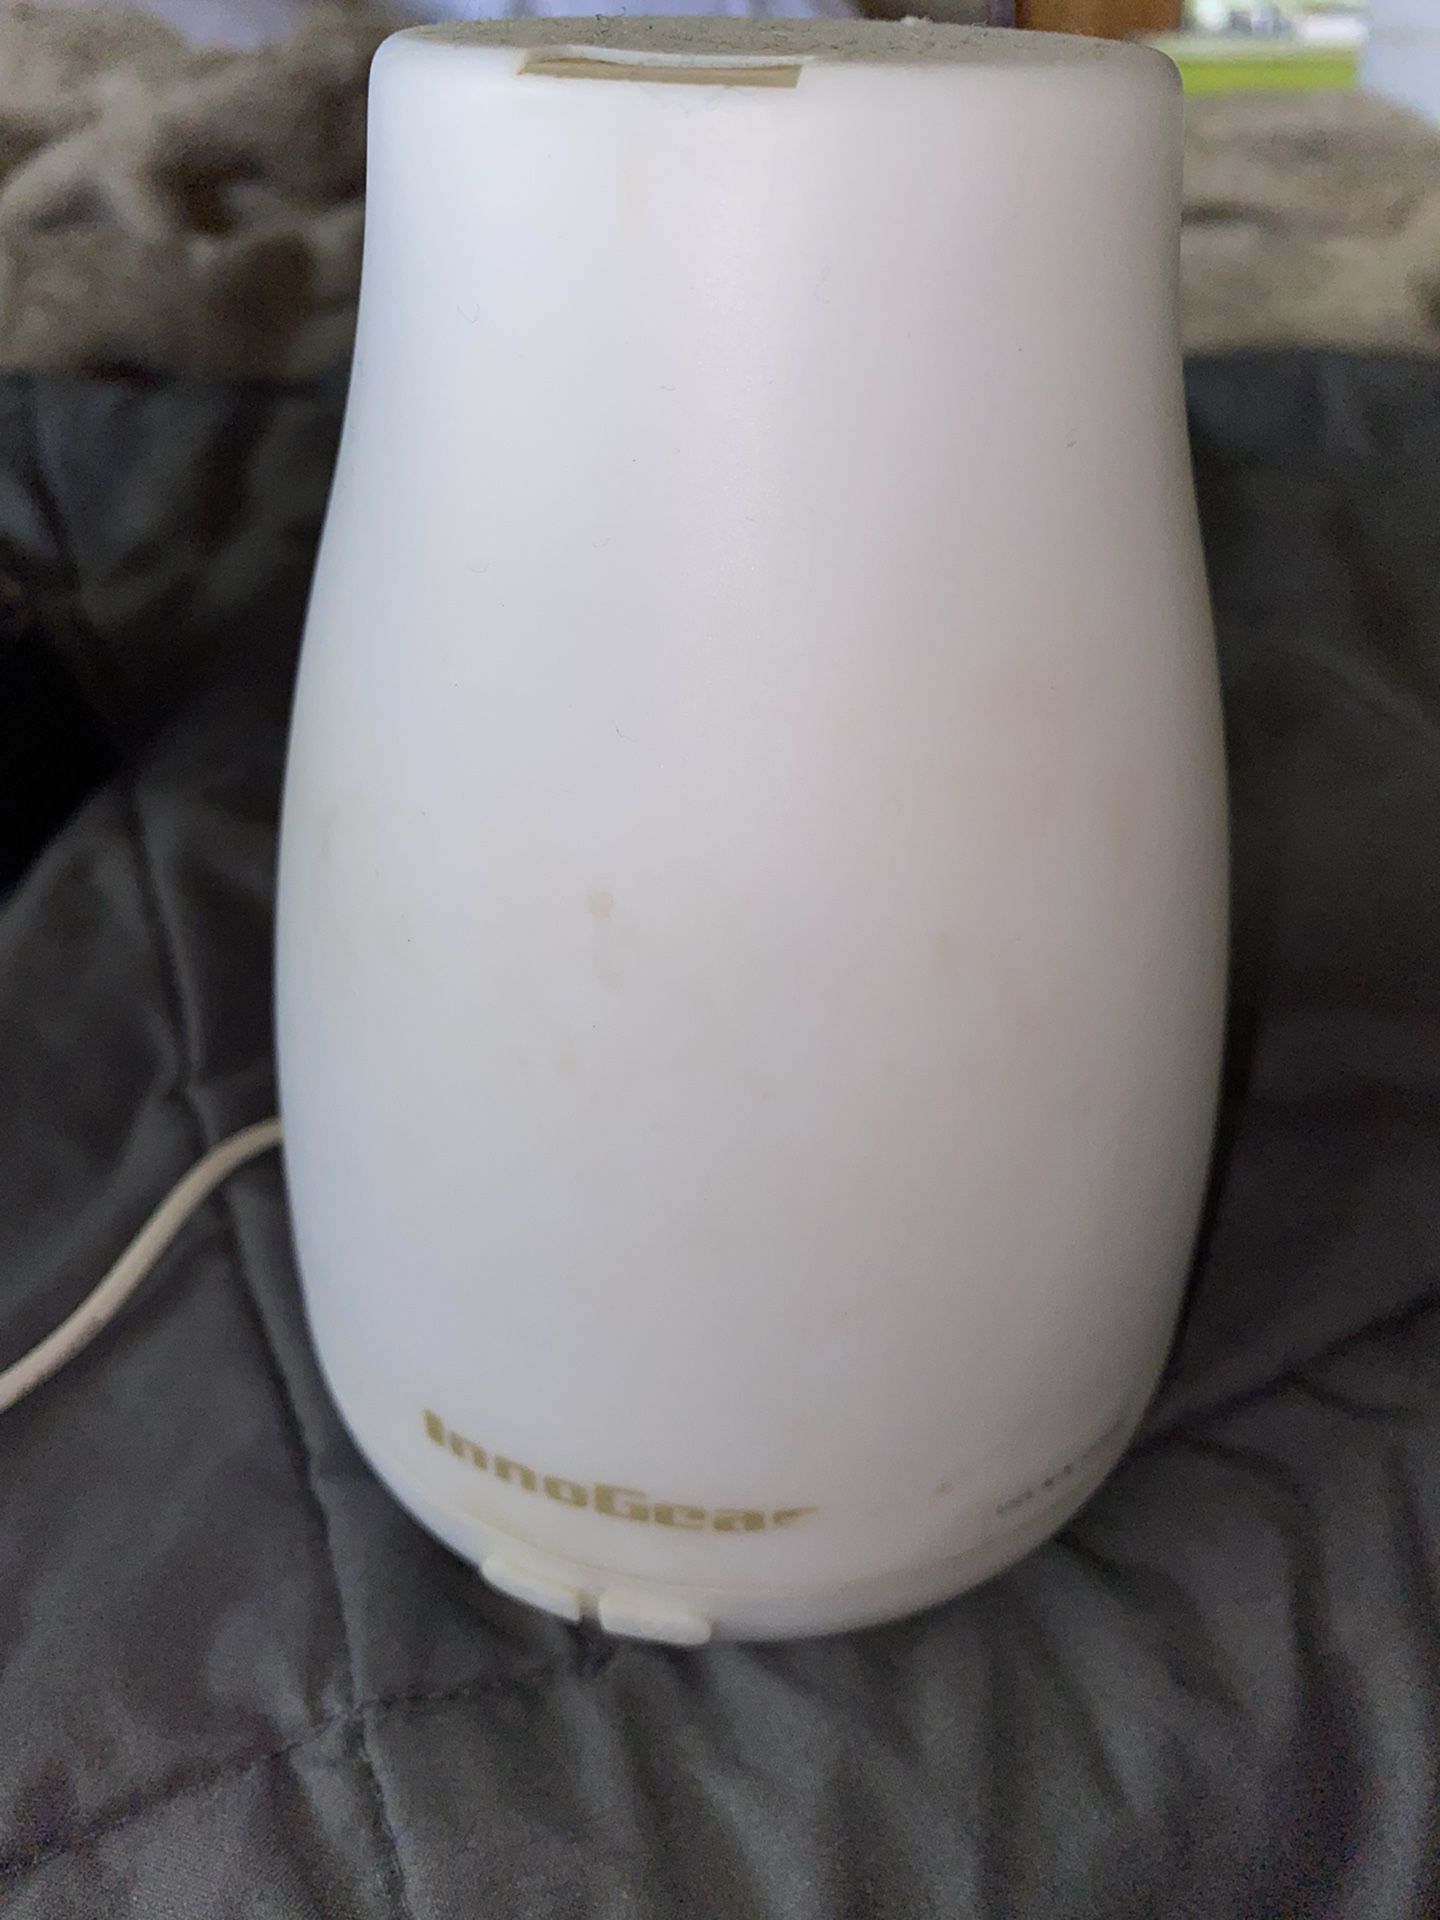 InnoGear Essential Oil Diffuser, Upgraded Diffusers for Essential Oils  Aromatherapy Diffuser Cool Mist Humidifier with 7 Colors Lights 2 Mist Mode  Wat for Sale in Renton, WA - OfferUp